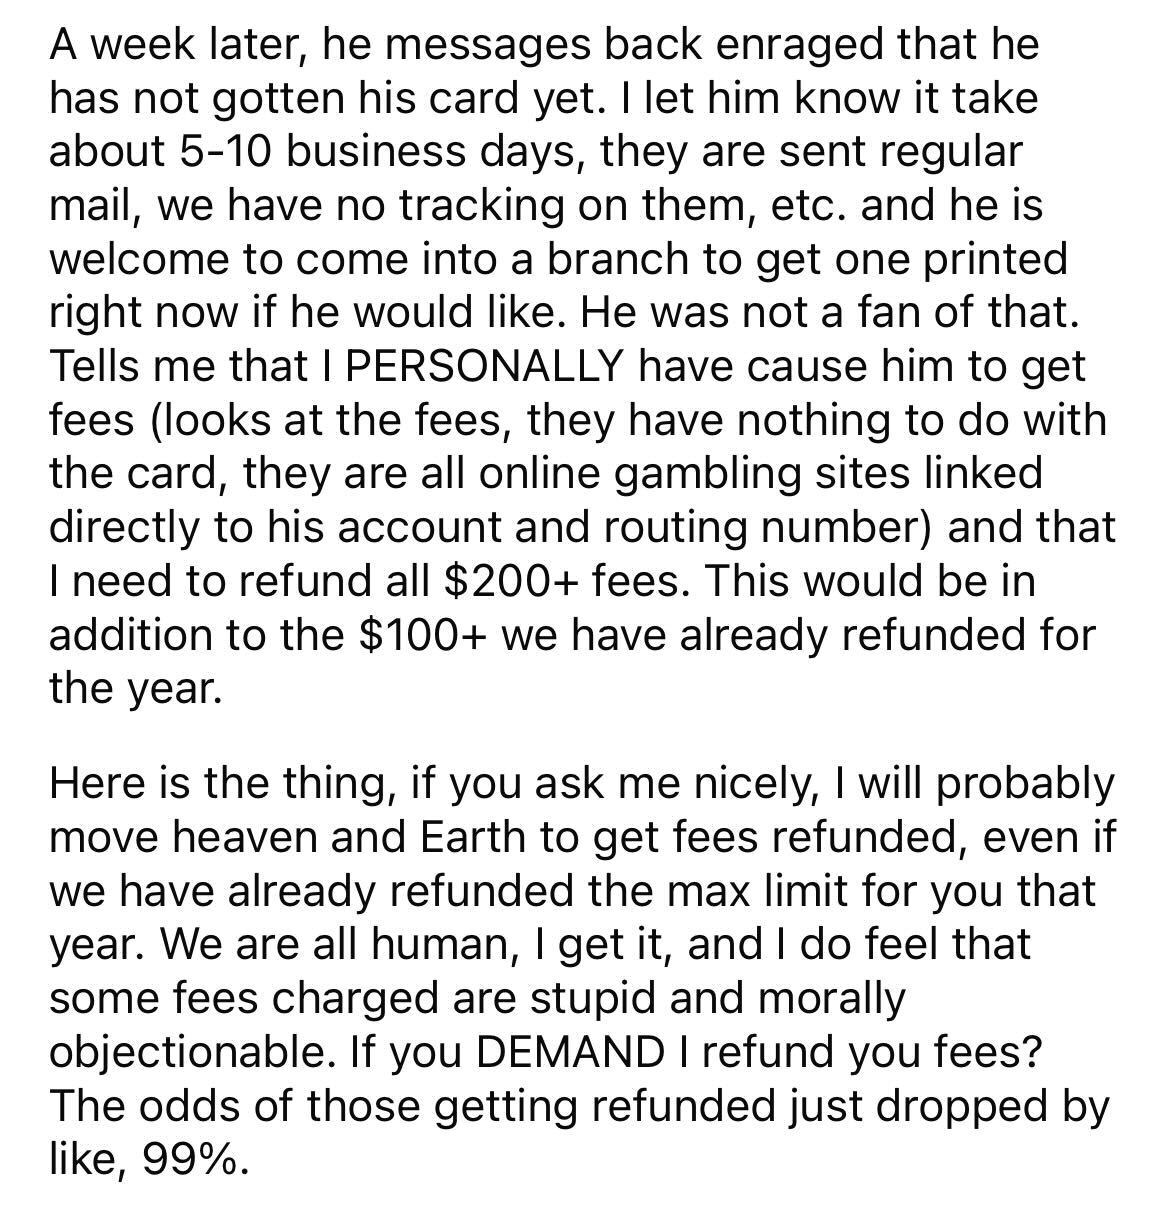 Entitled Customer Demands Refund or Close His Account, Gets The Latter